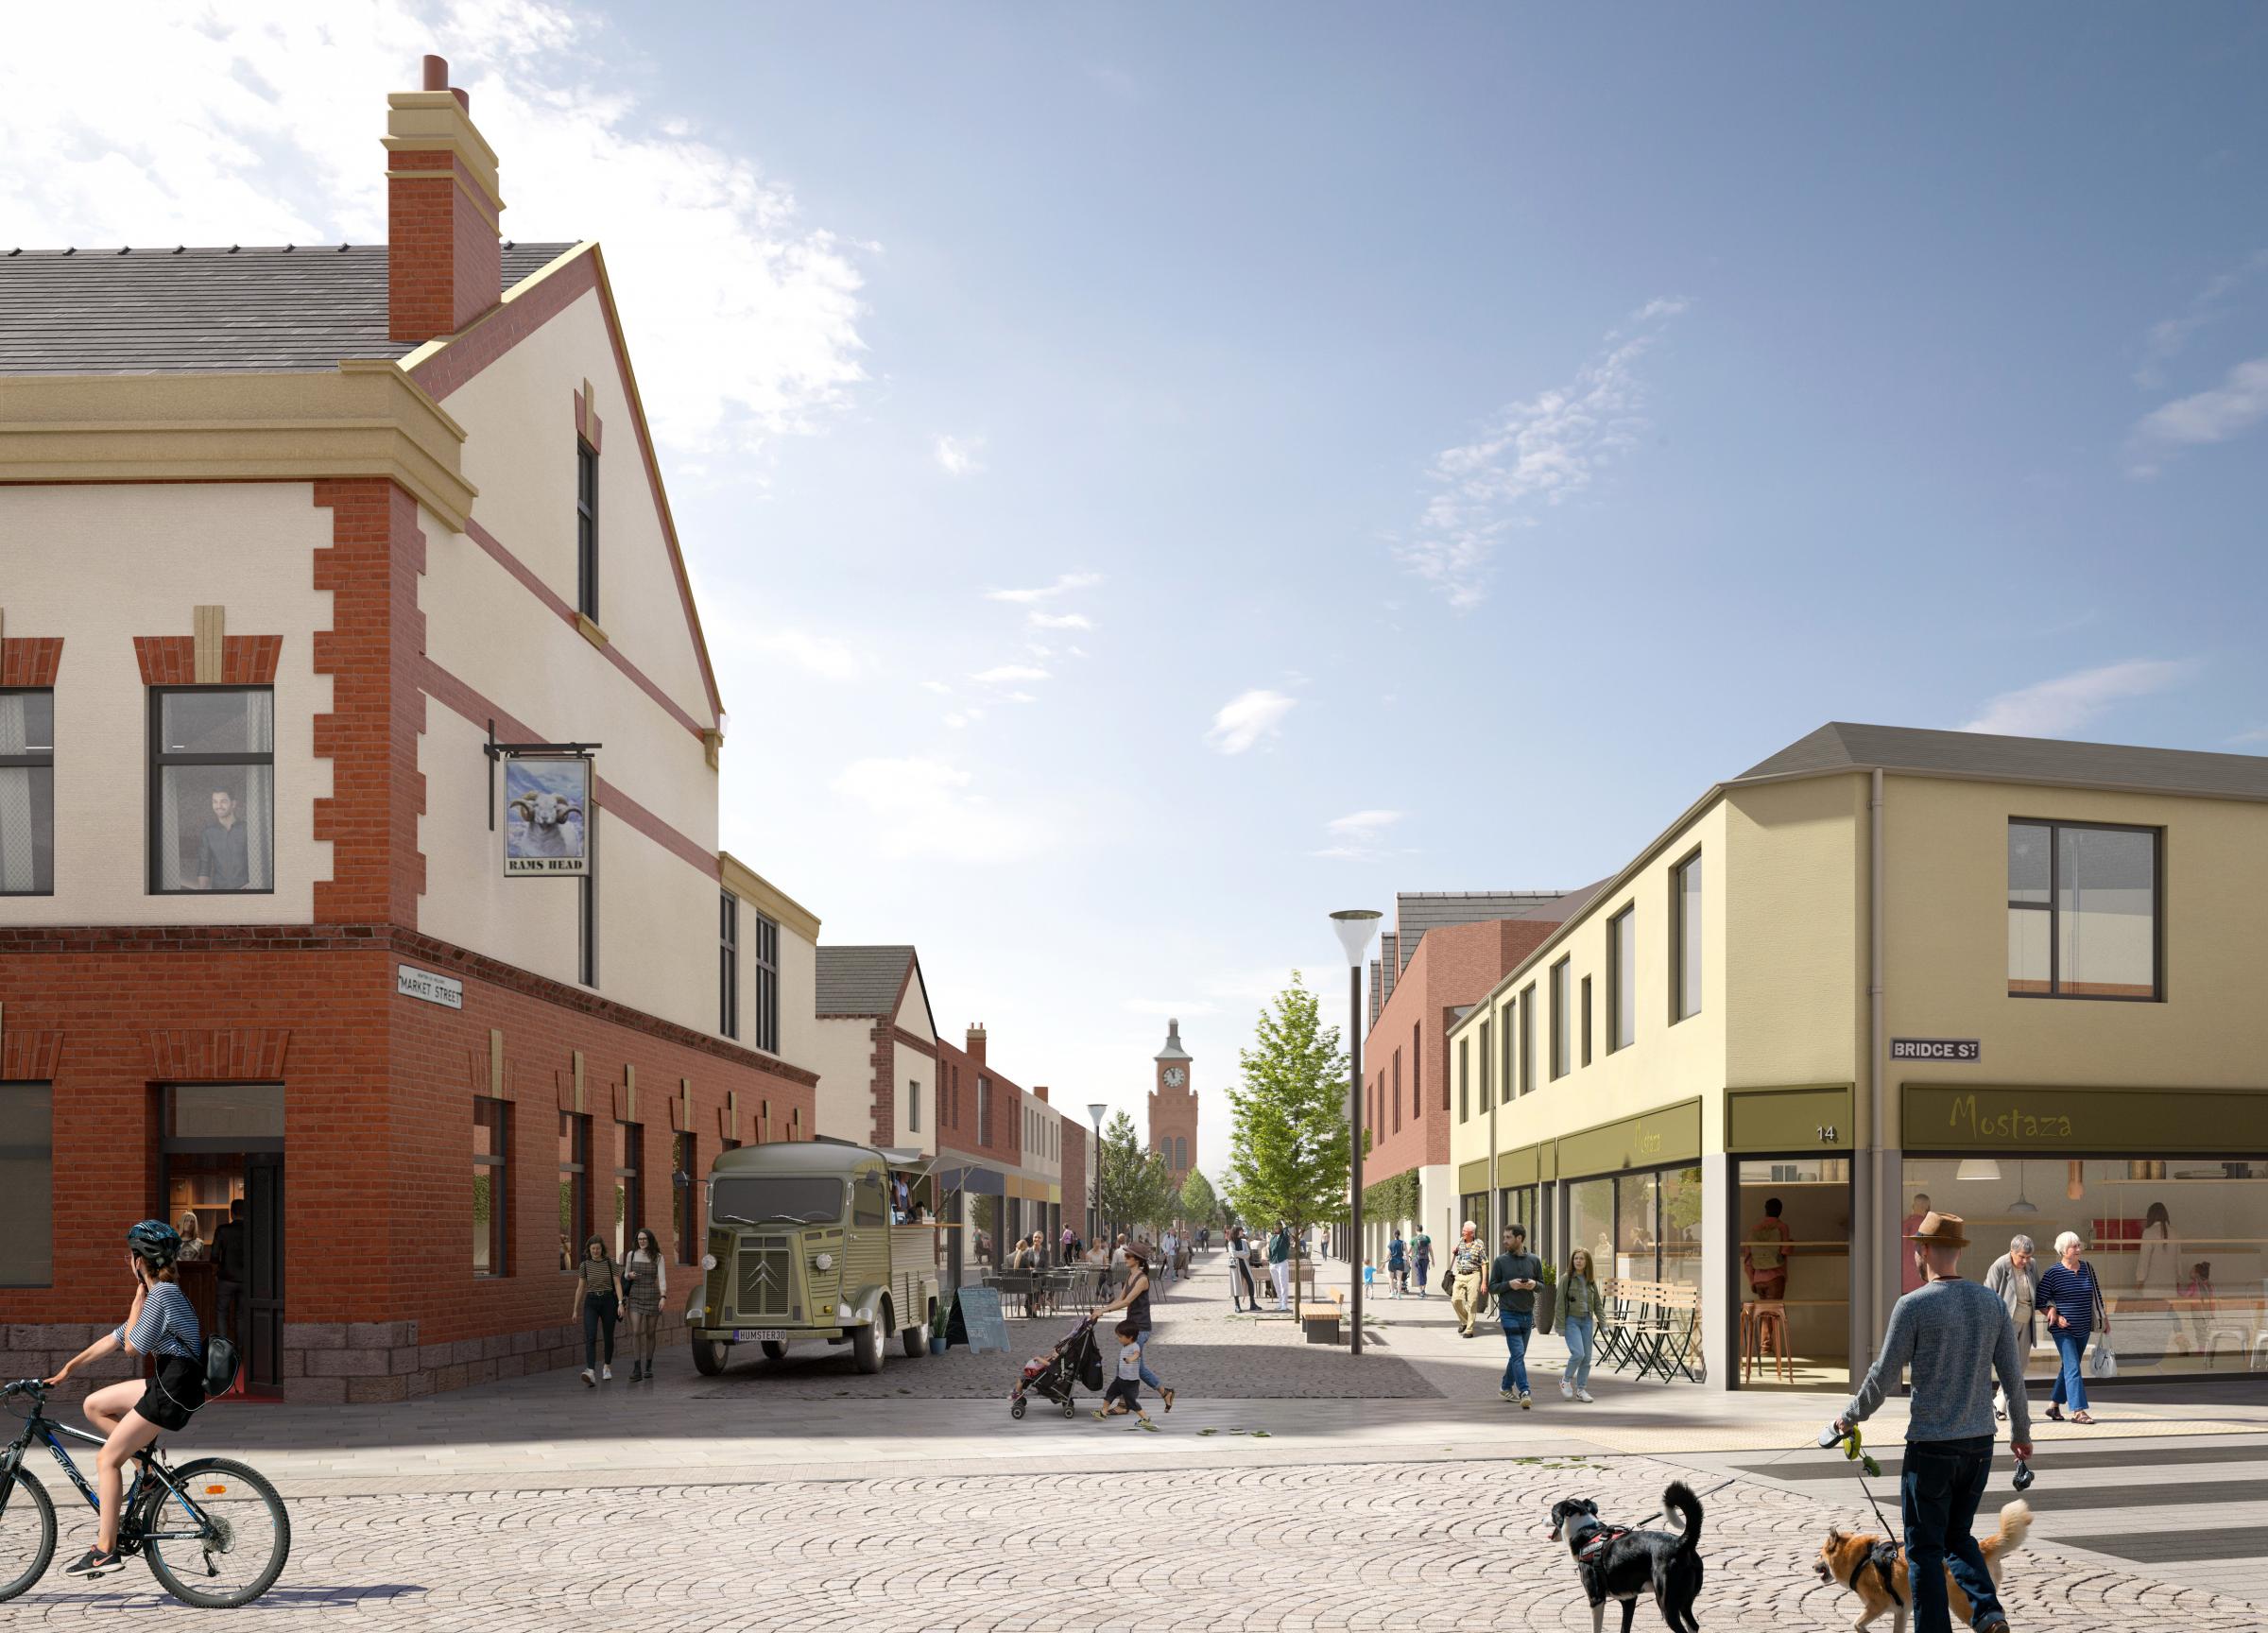 Street scenes of how the transformed areas could look